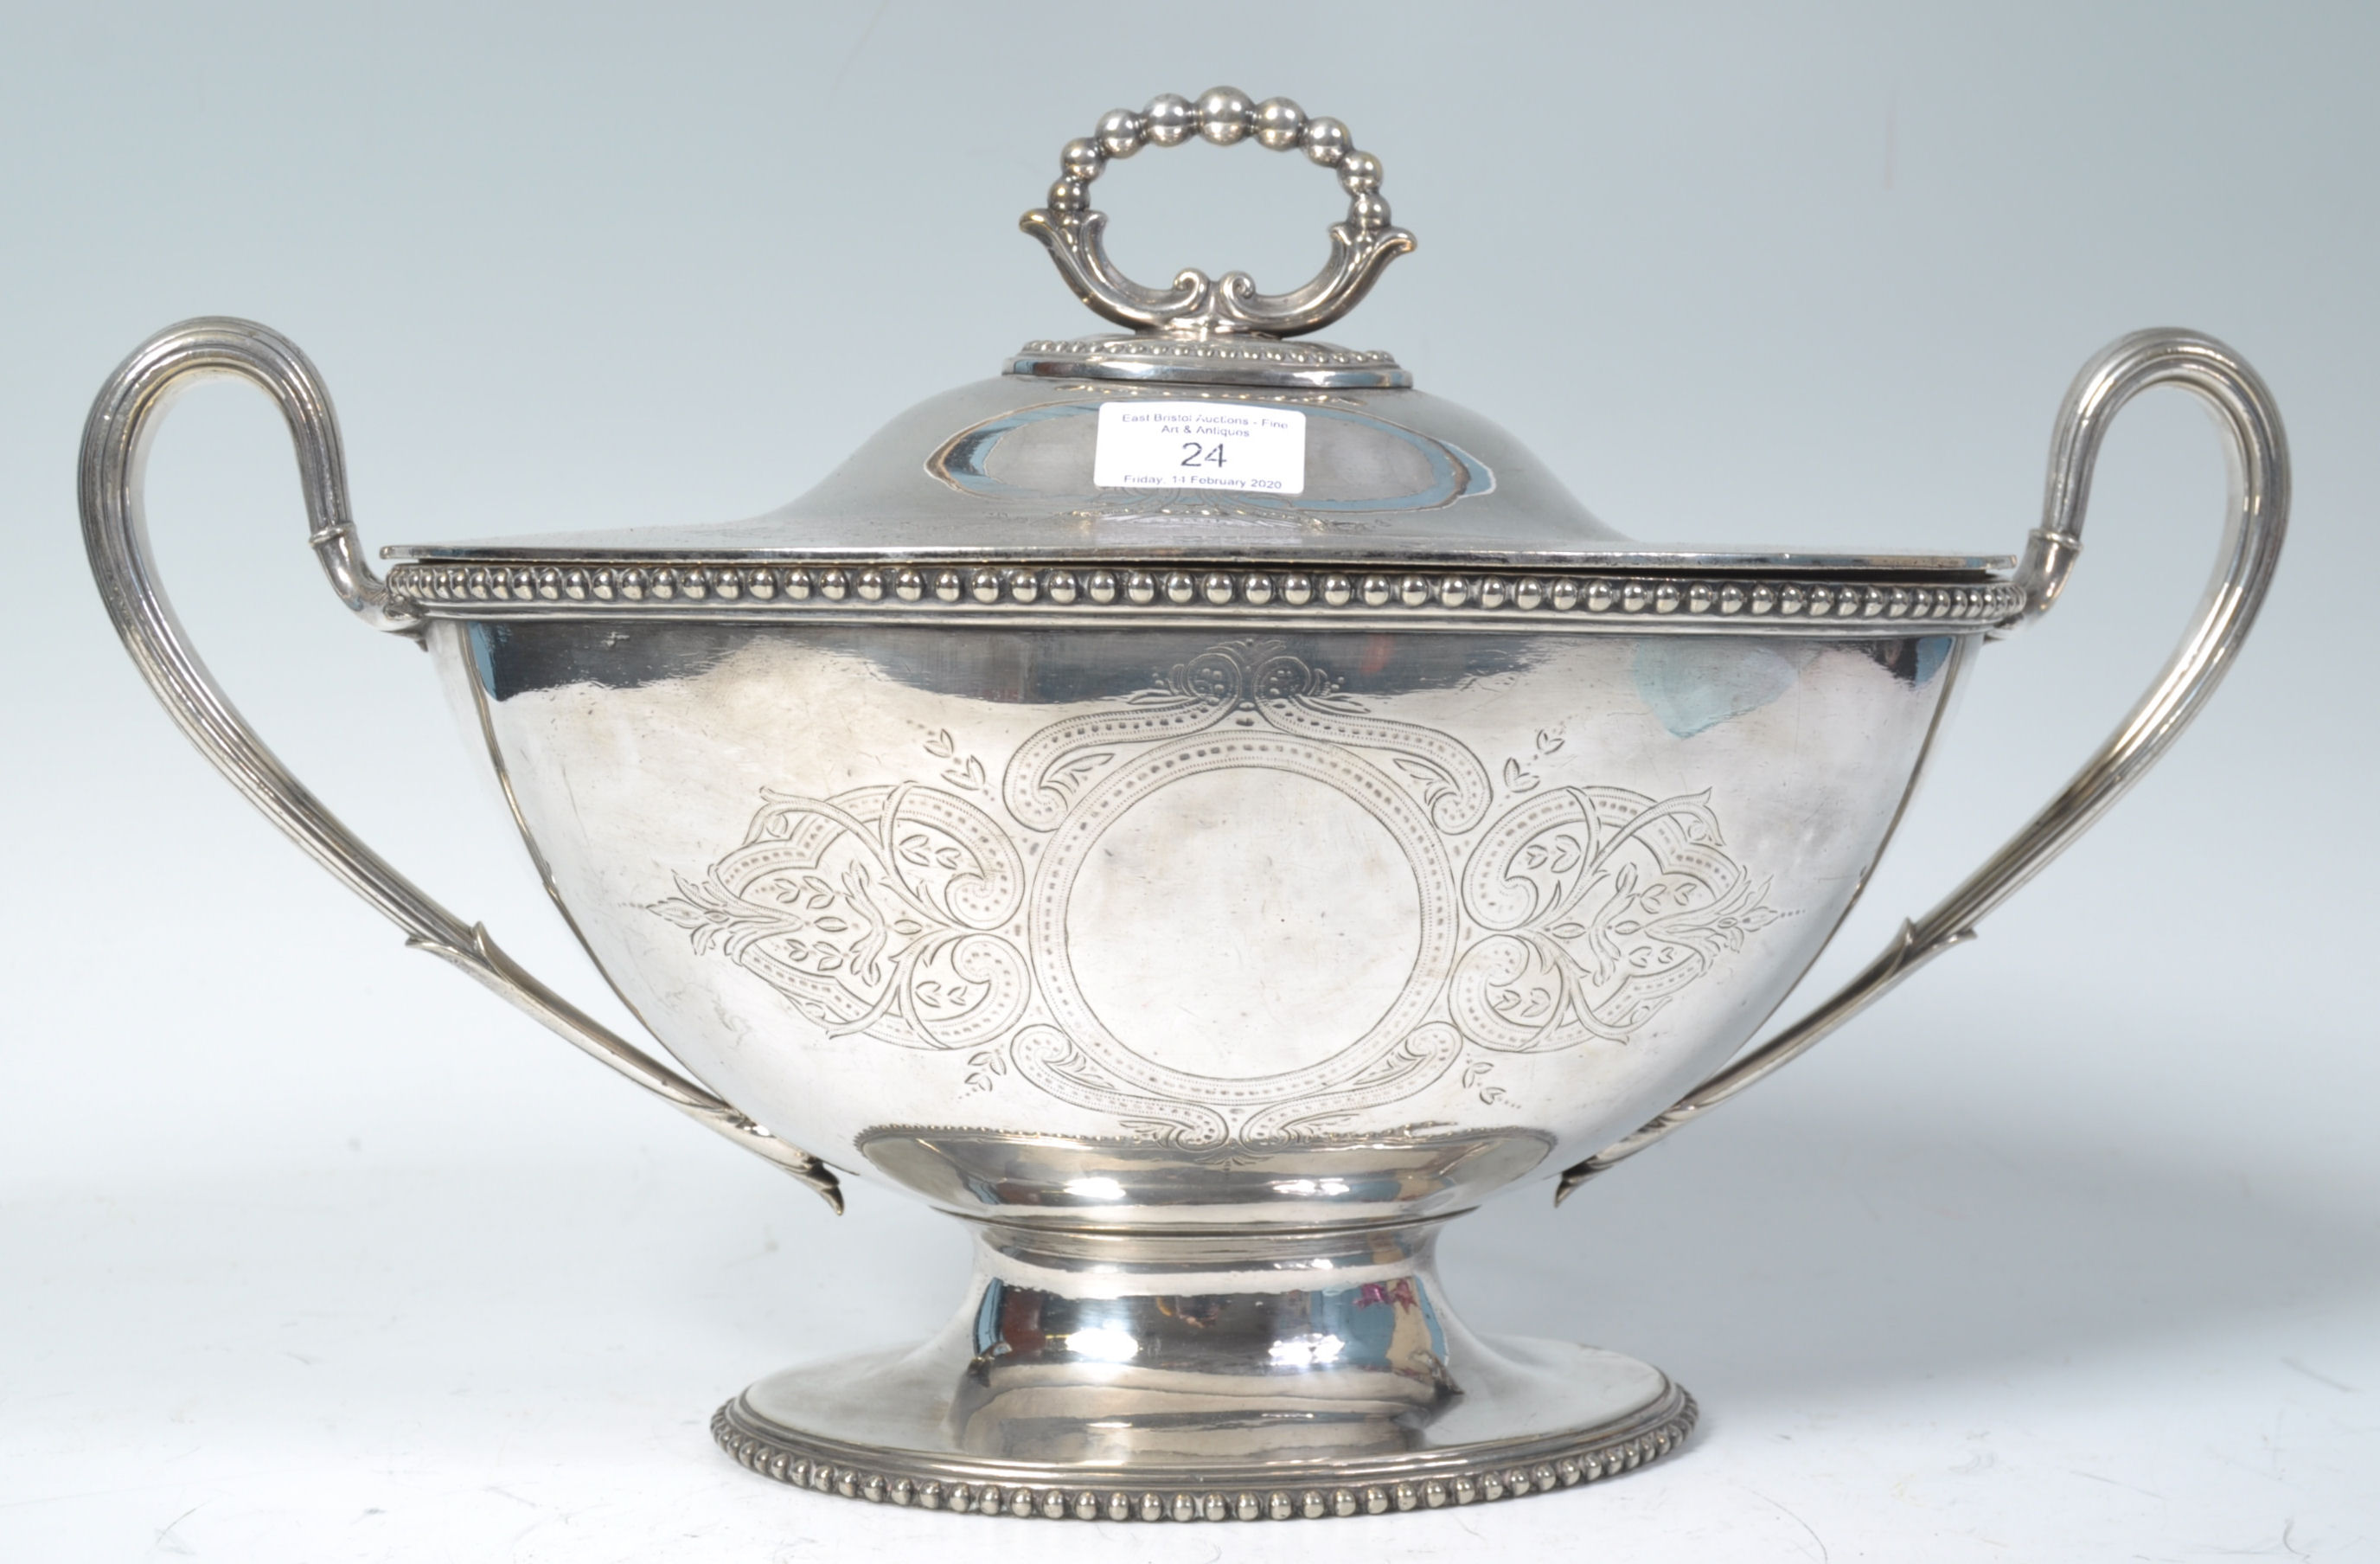 STUNNING 19TH CENTURY SILVER PLATED LARGE TUREEN